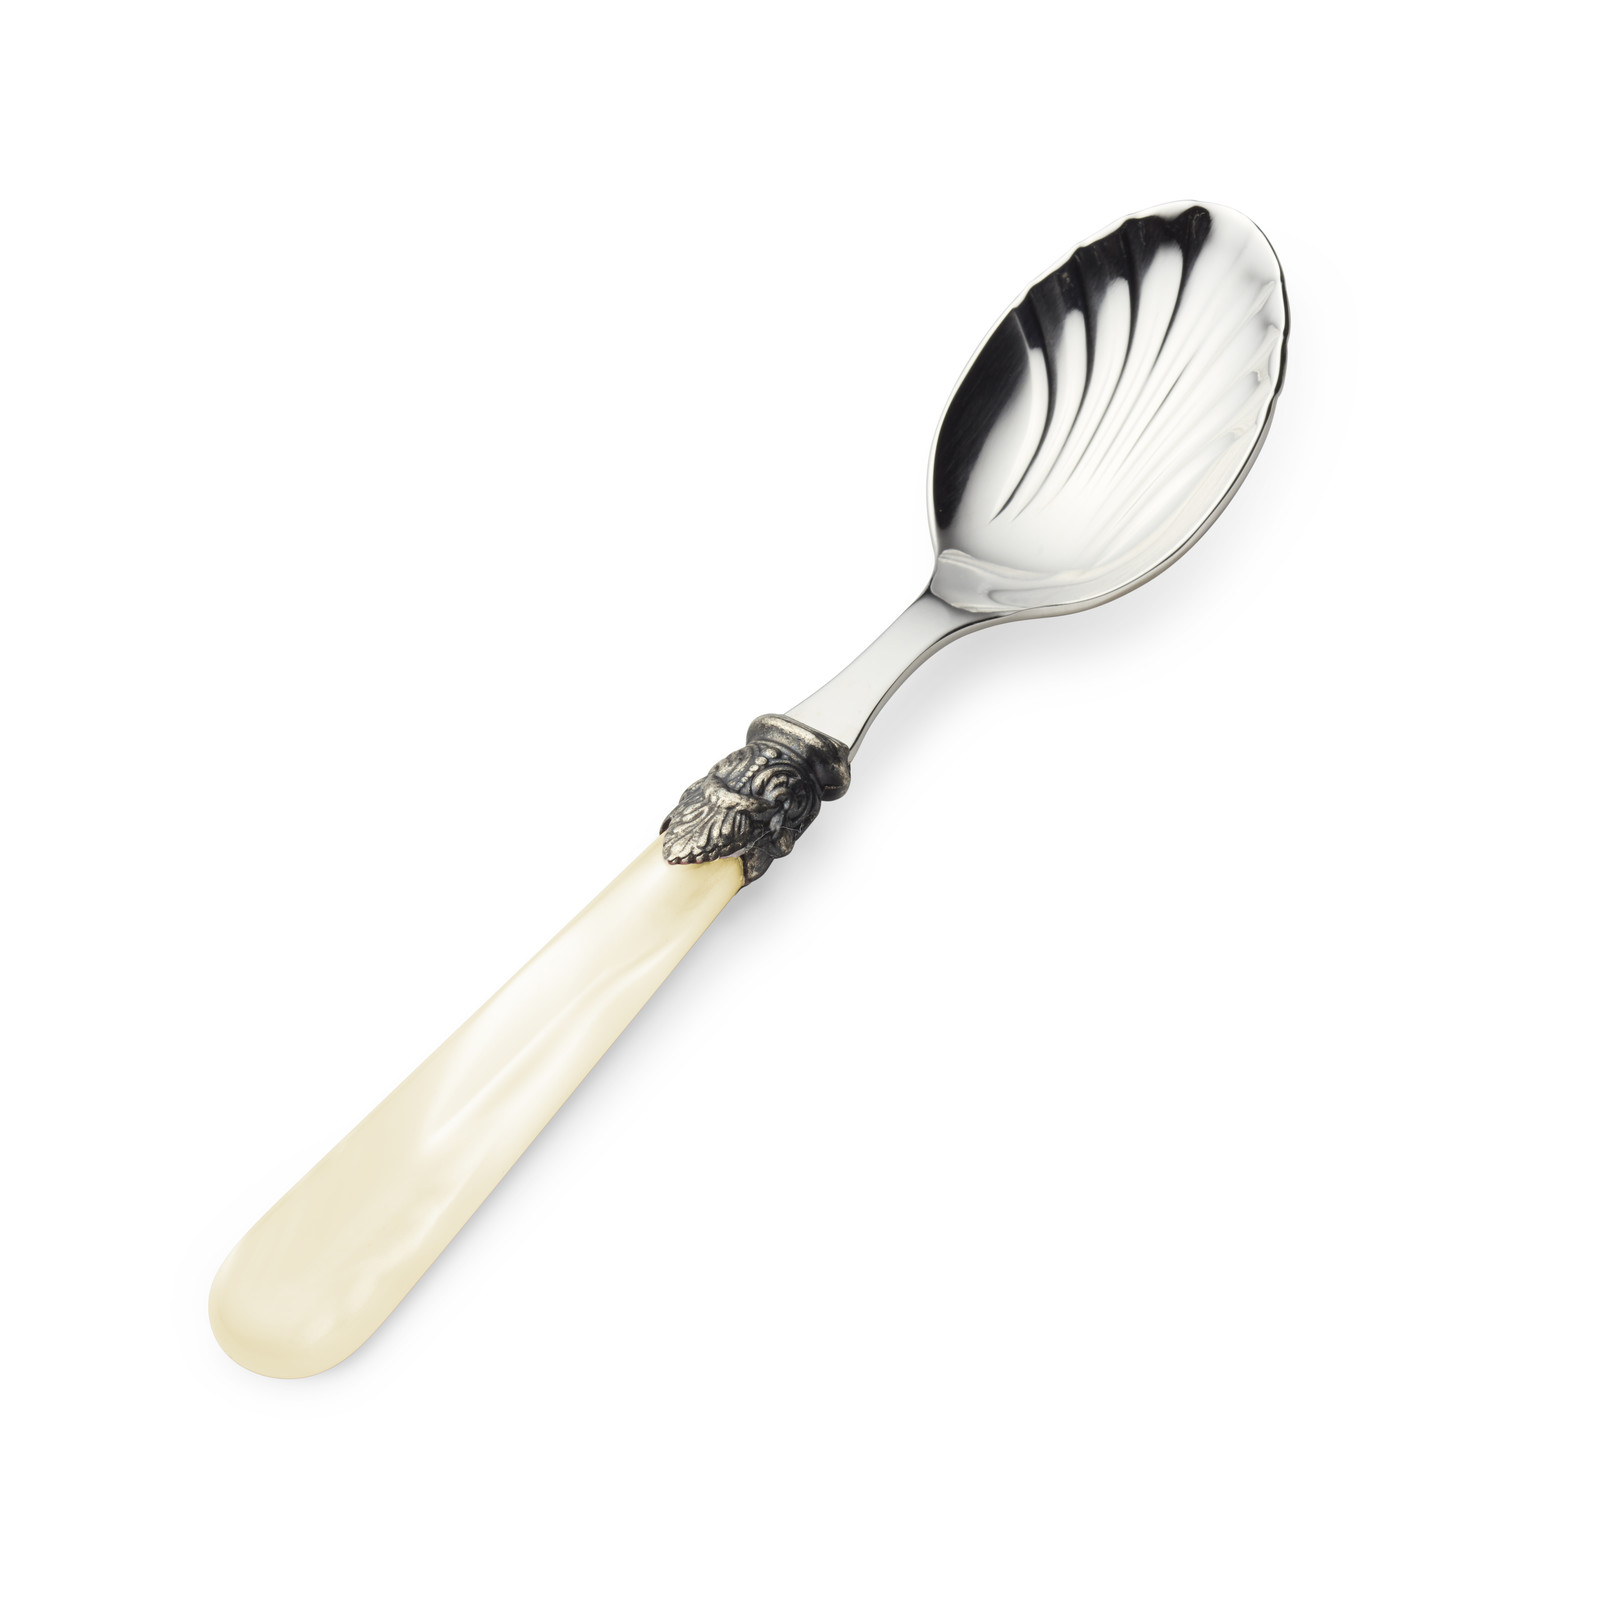 Cheese spoon / Tapas spoon, Ivory with Mother of Pearl